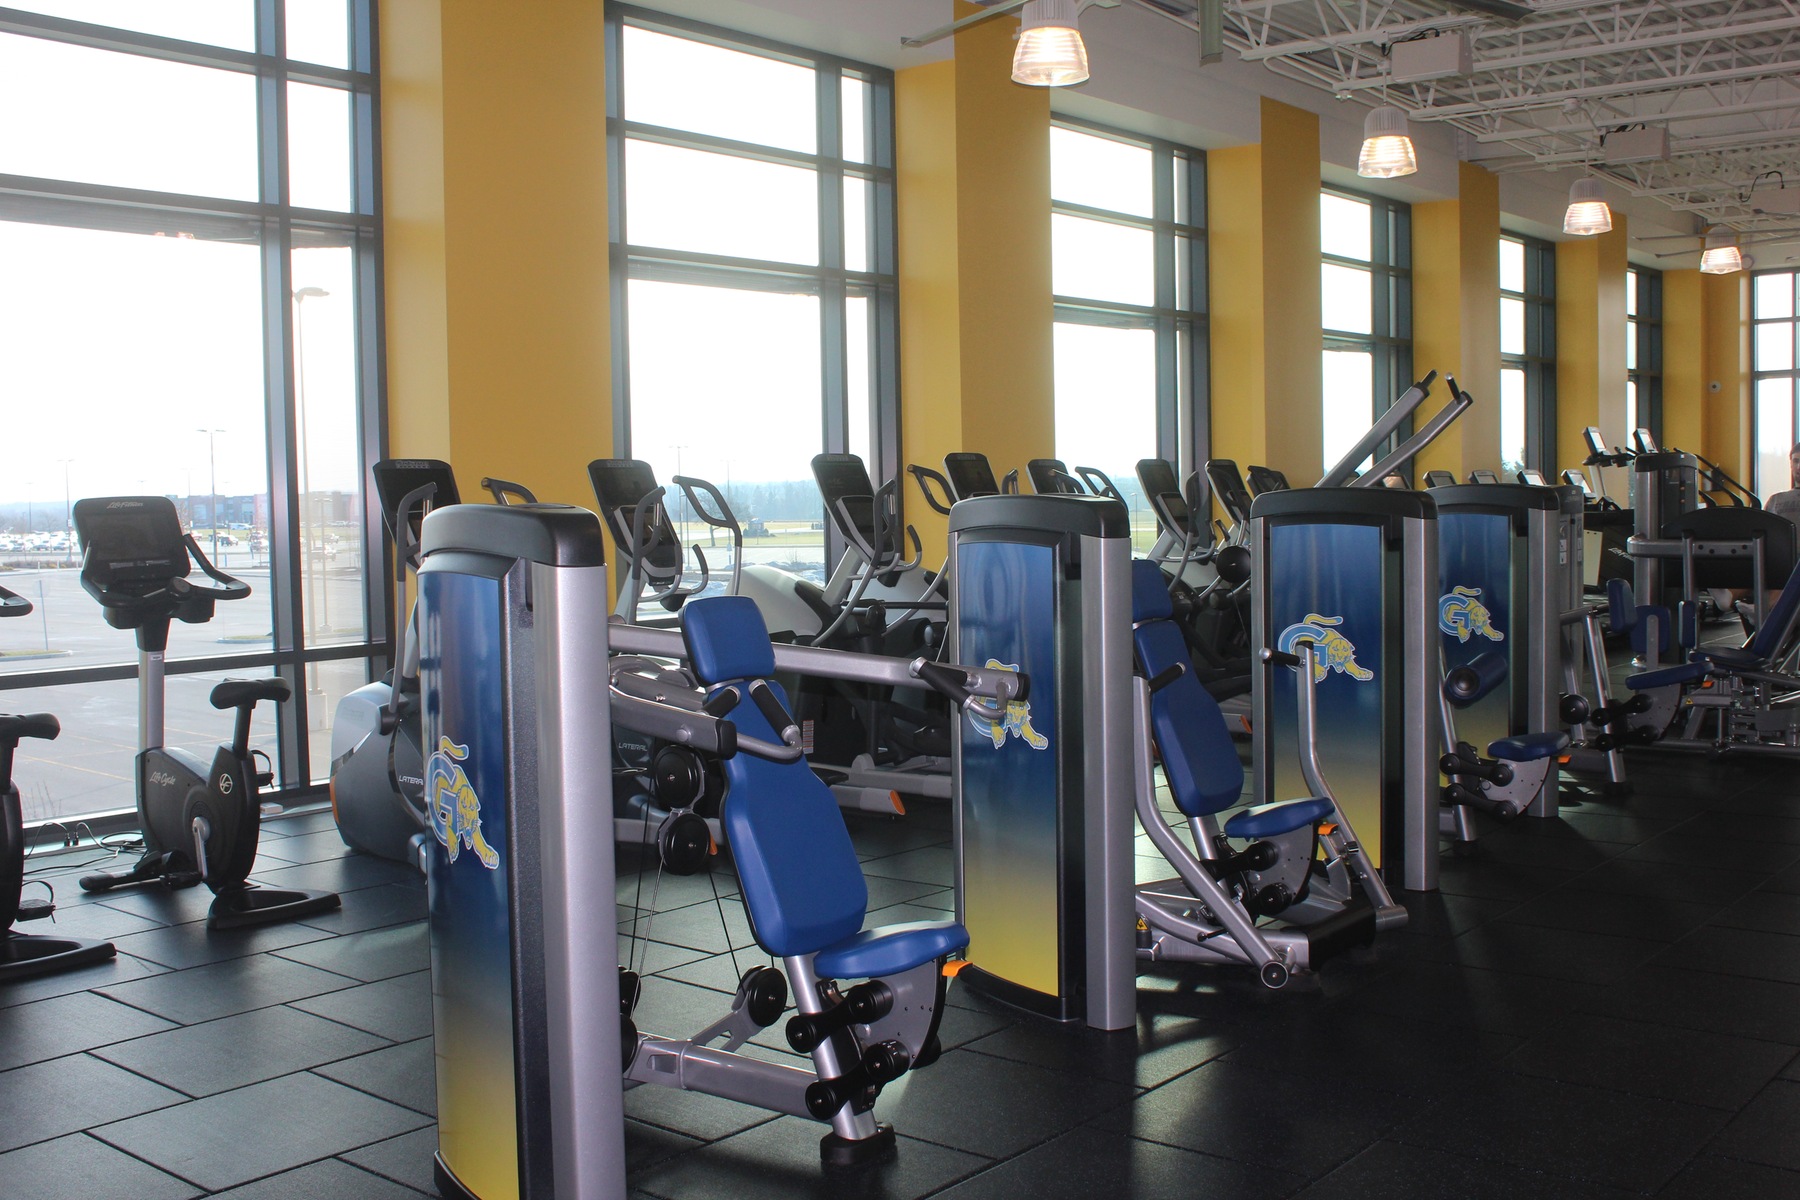 The state of the art Fitness Center located inside the Richard C Call Arena